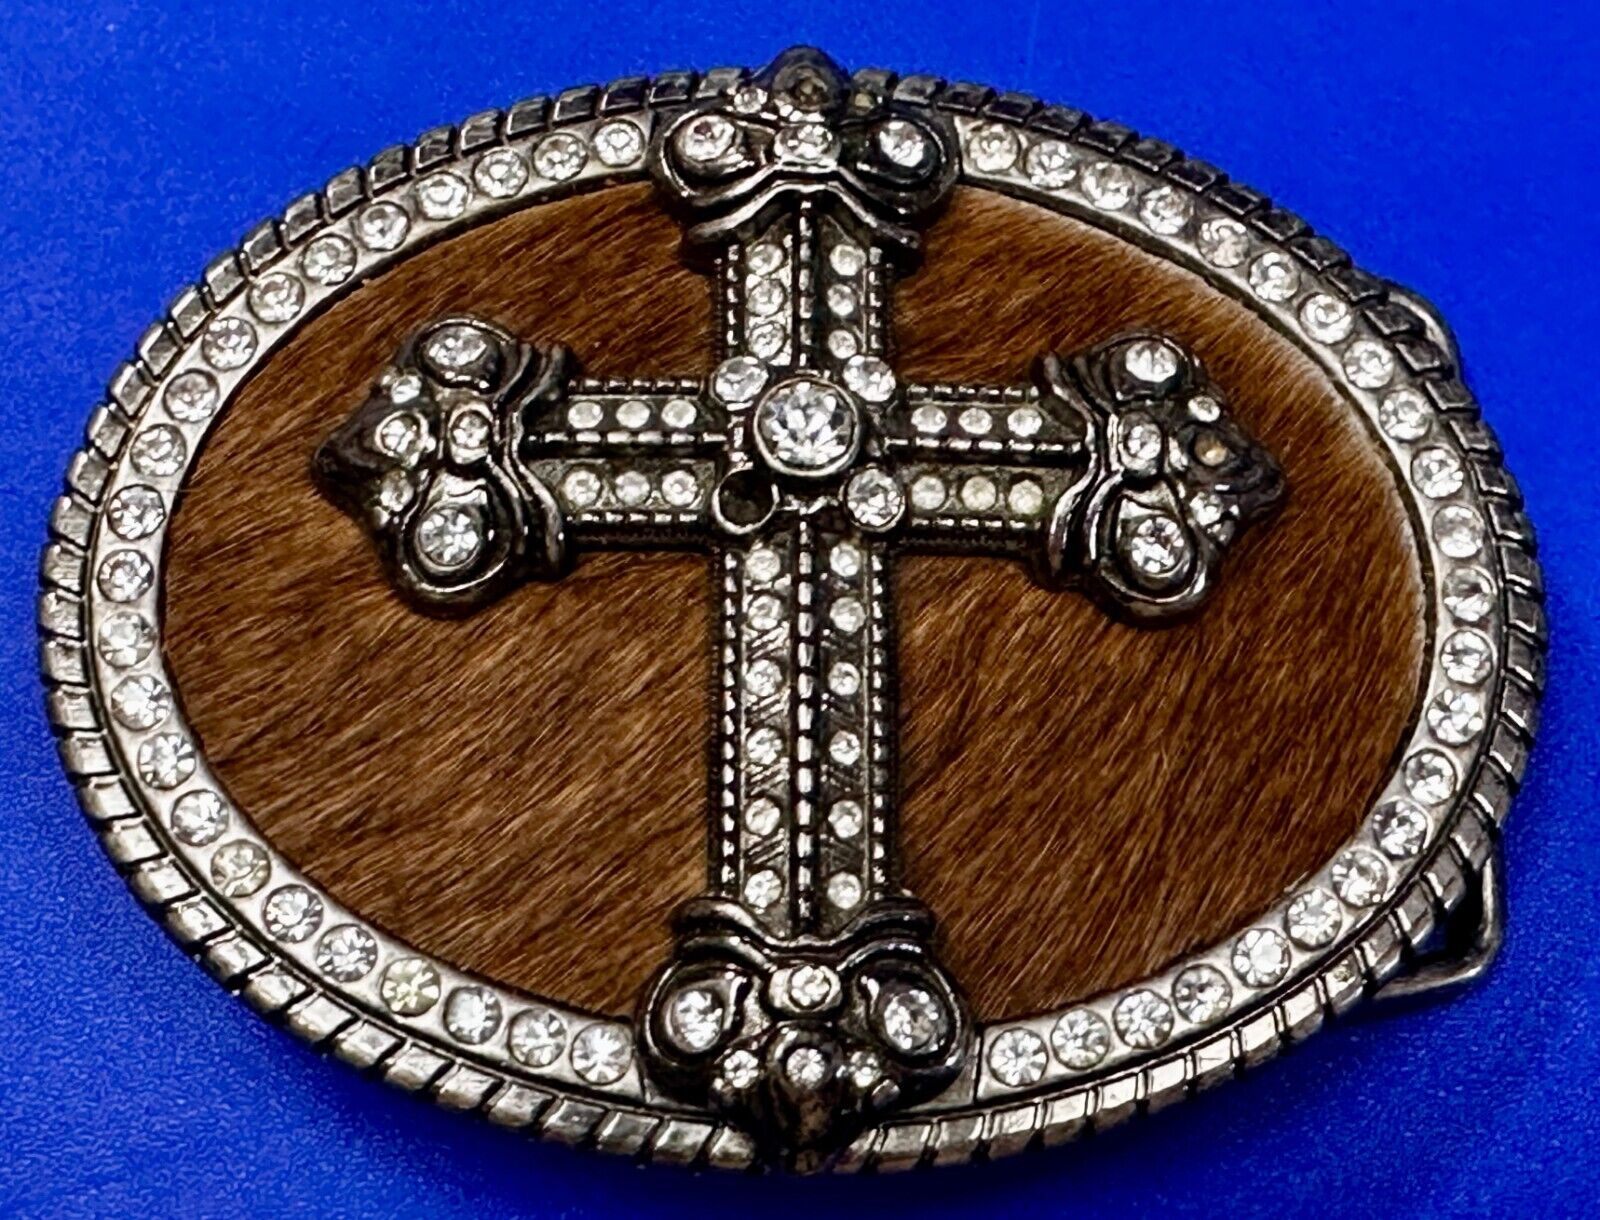 Cross on Cowhide Leather Religious Faith Belt Buckle - Missing a Rhinestone